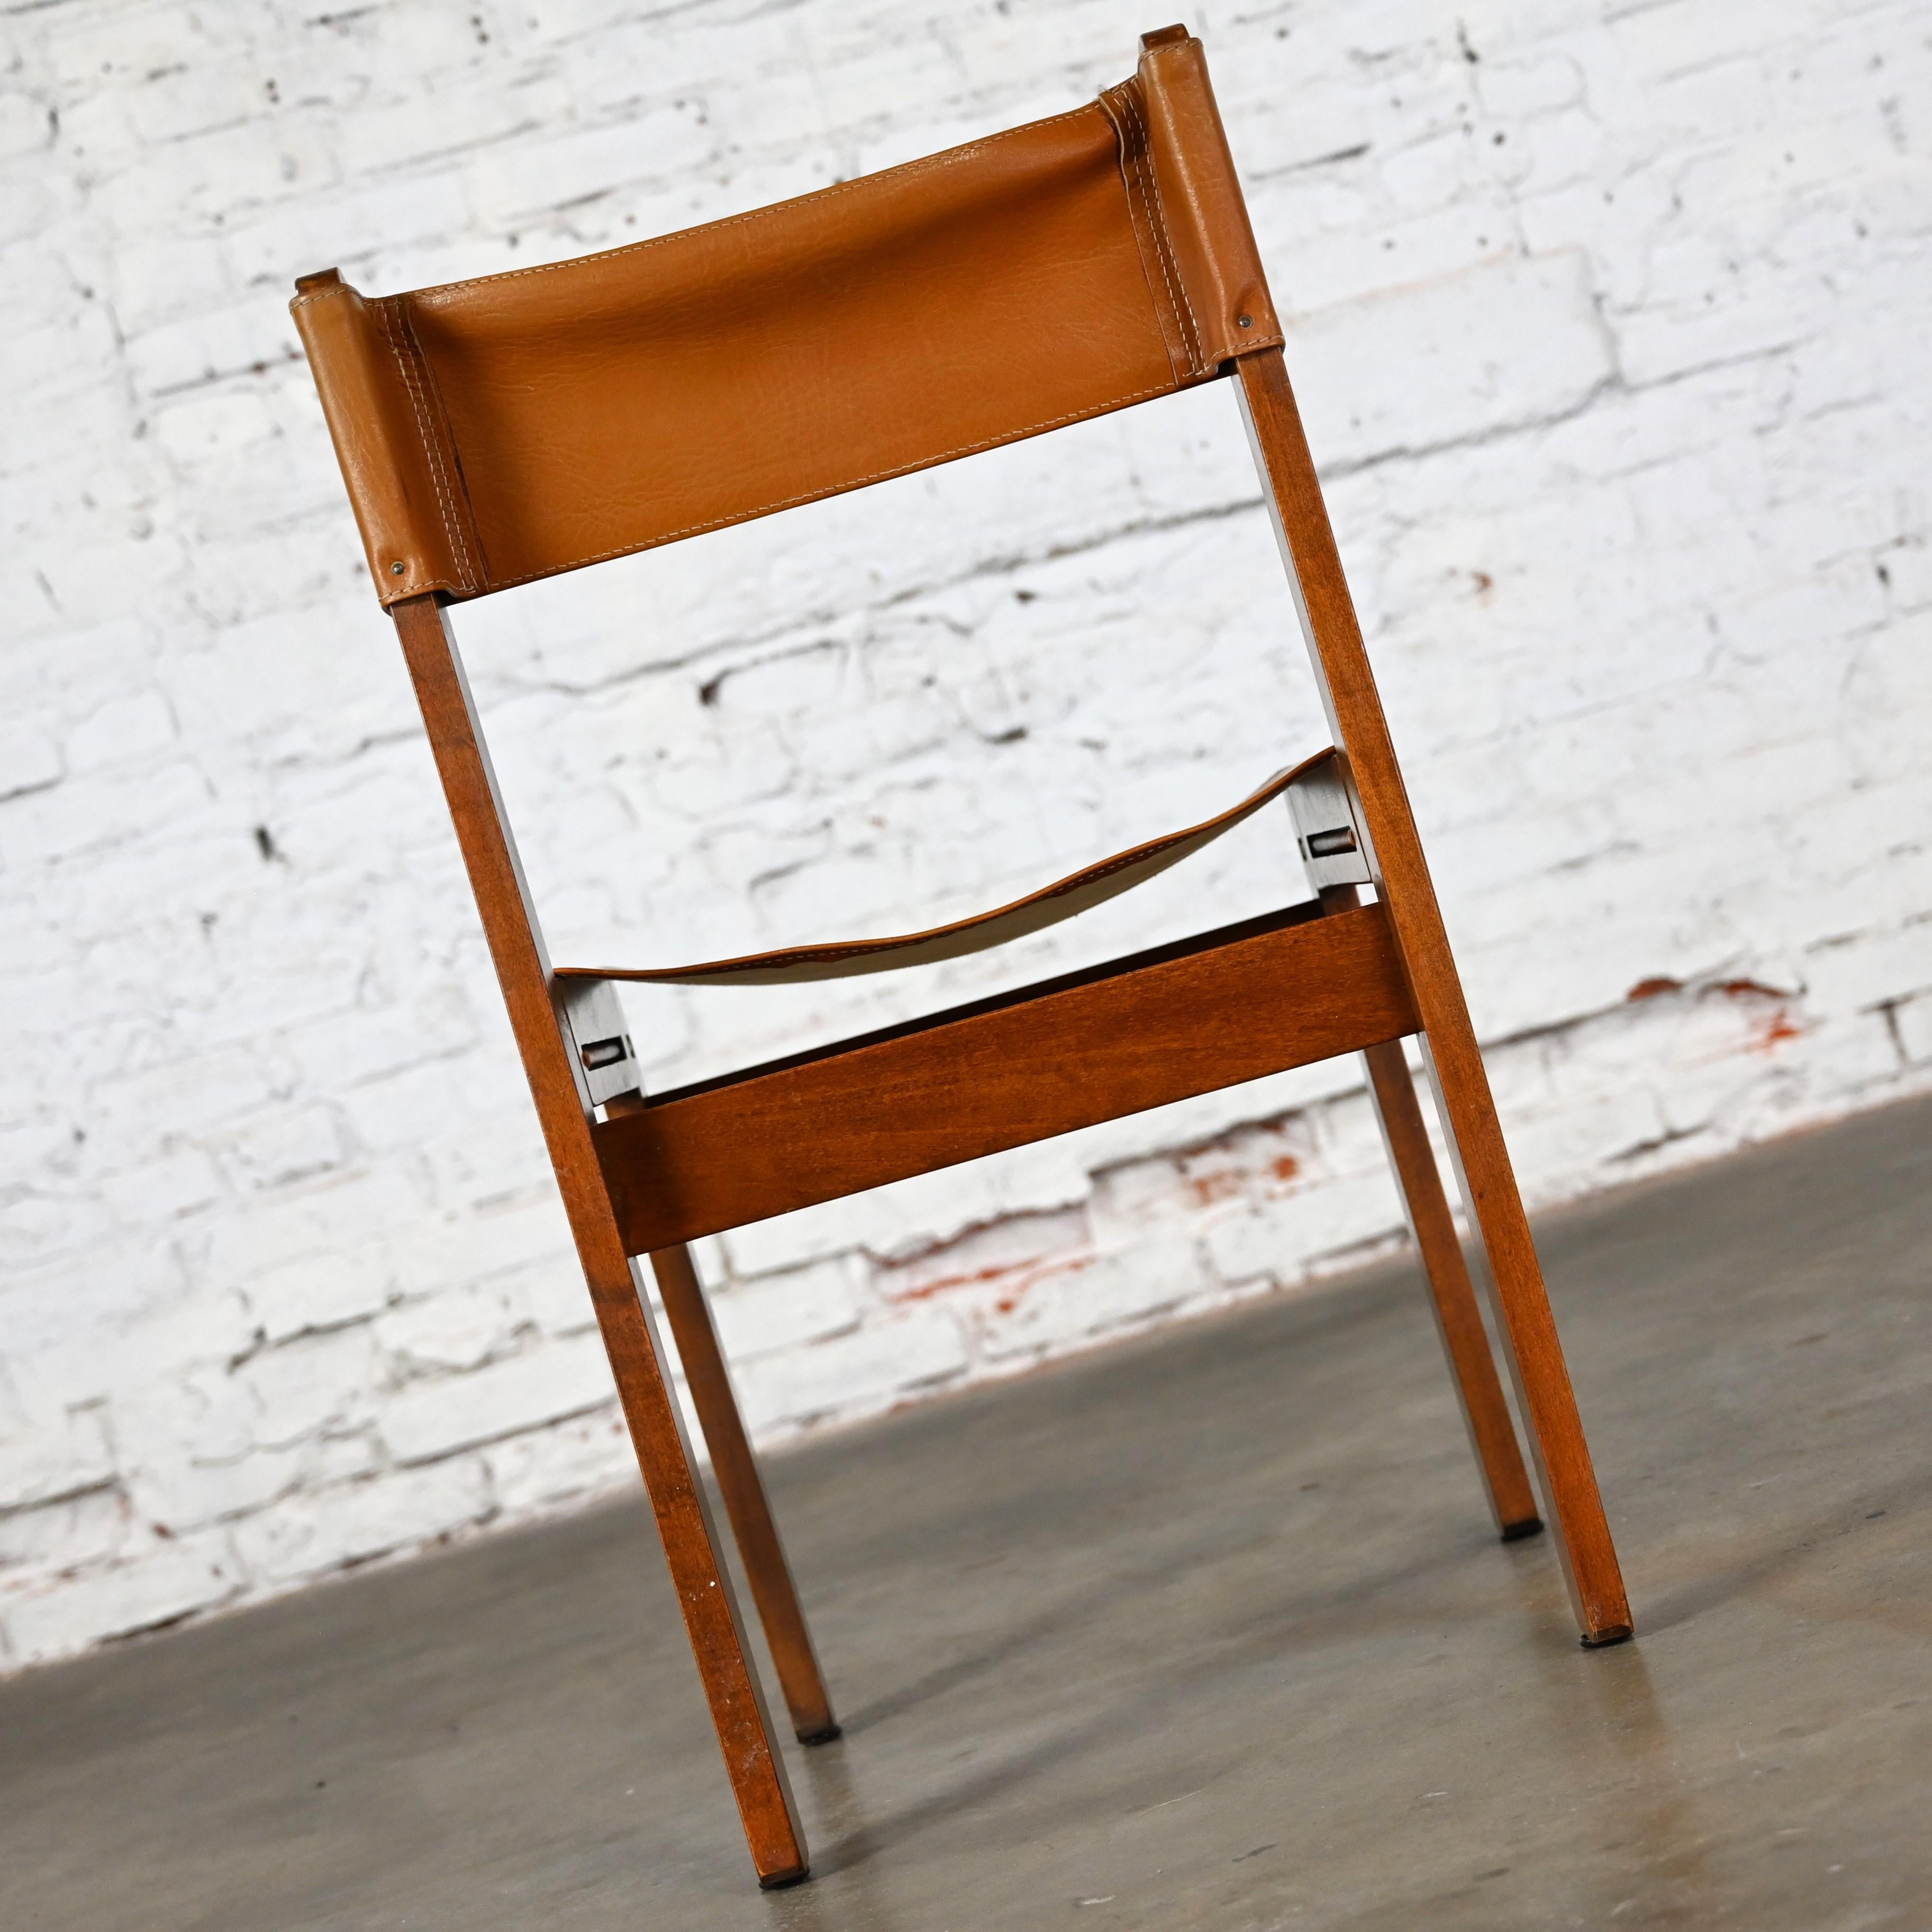 1970’s Modern Sling Chair Teak & Leather Style Michel Arnoult Made in Argentina For Sale 1